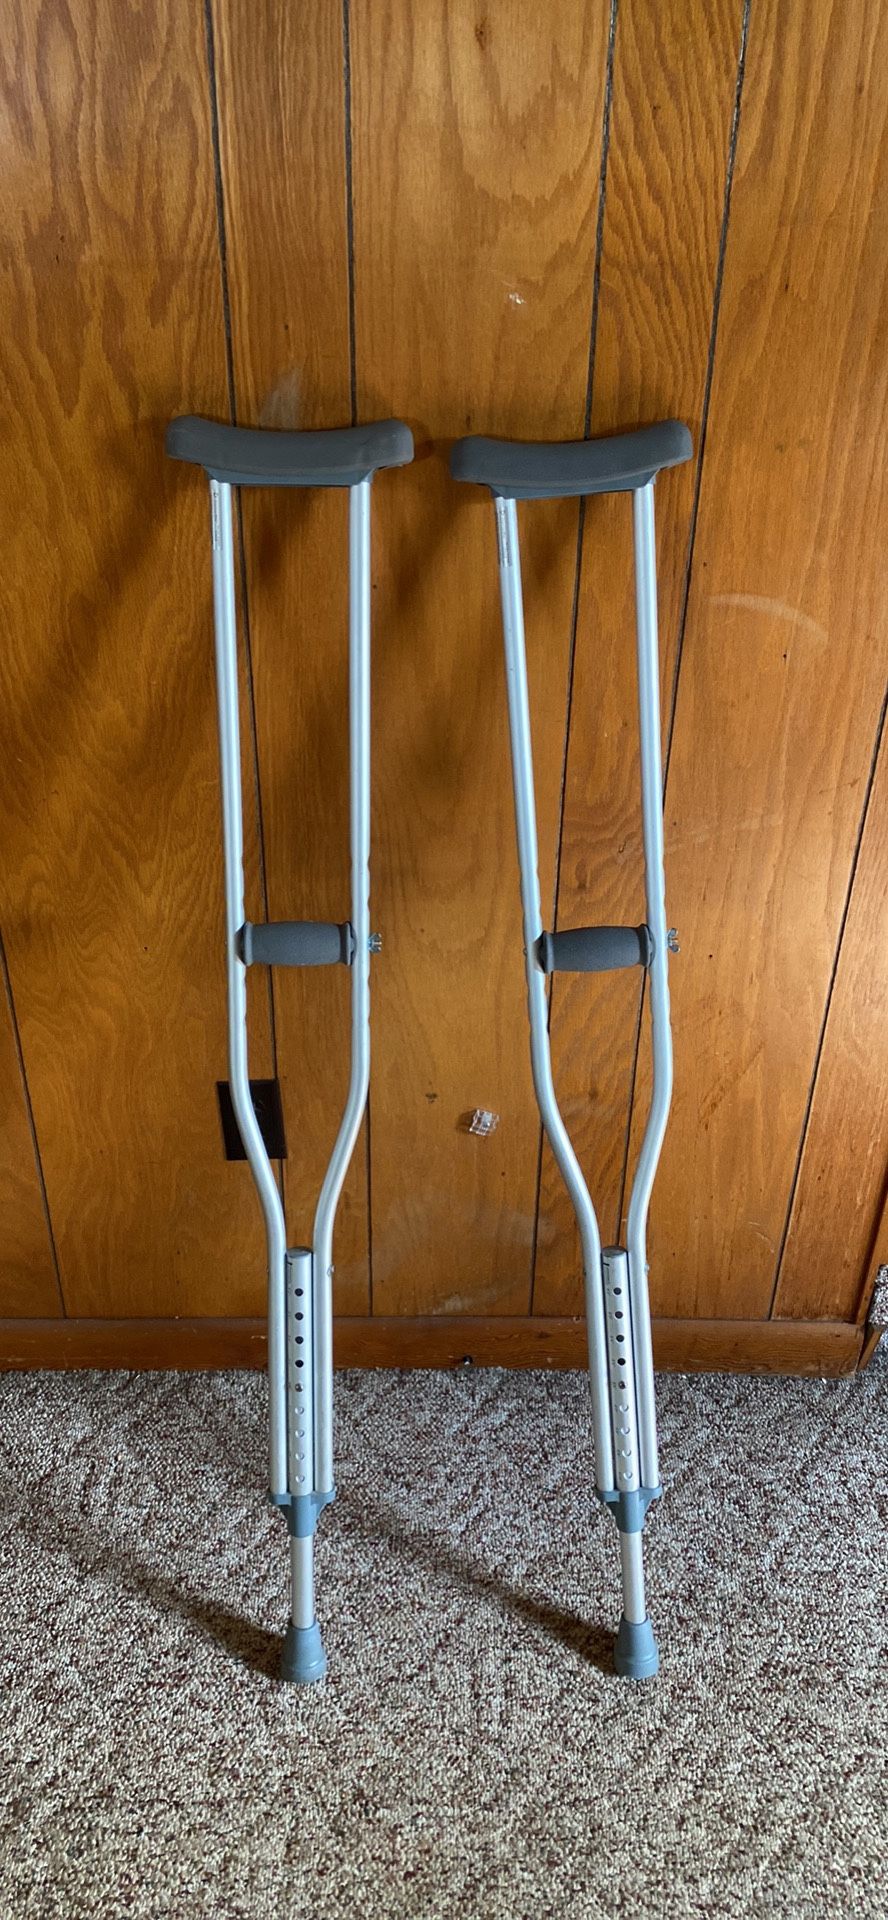 Crutches For Adult Or Kid